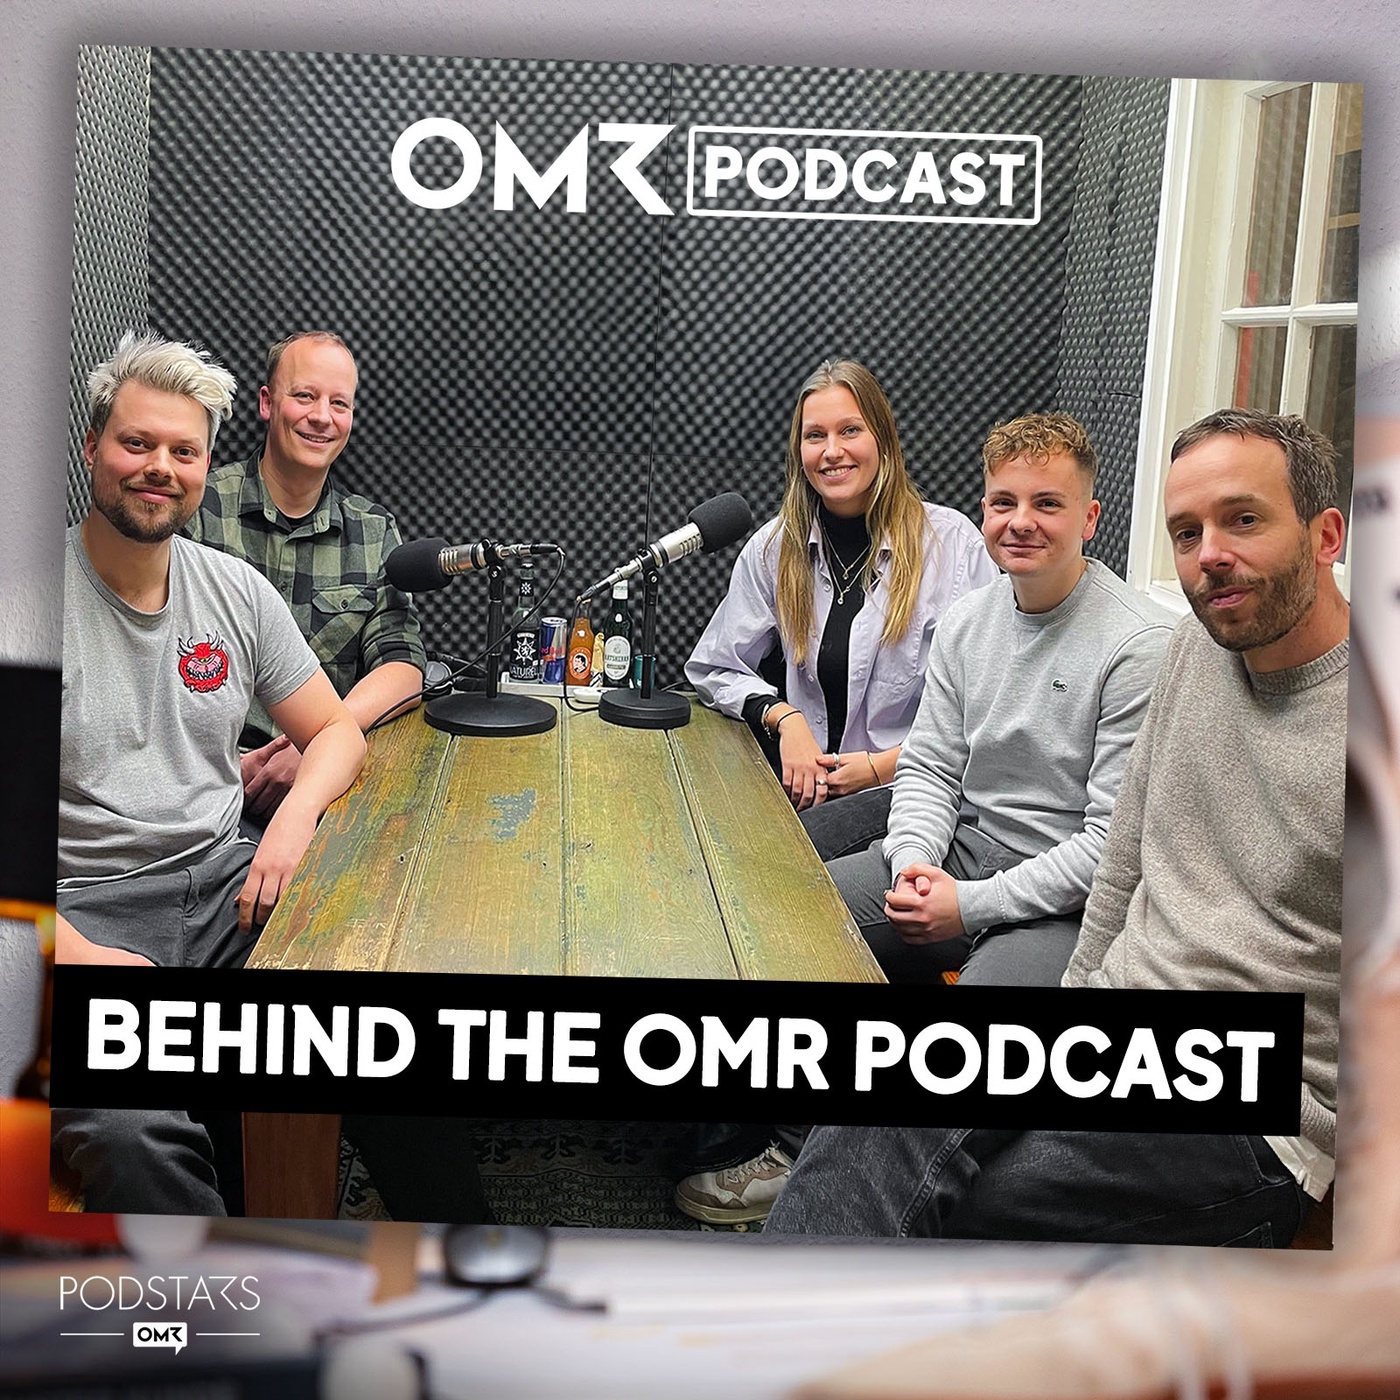 Behind the OMR Podcast (#658)